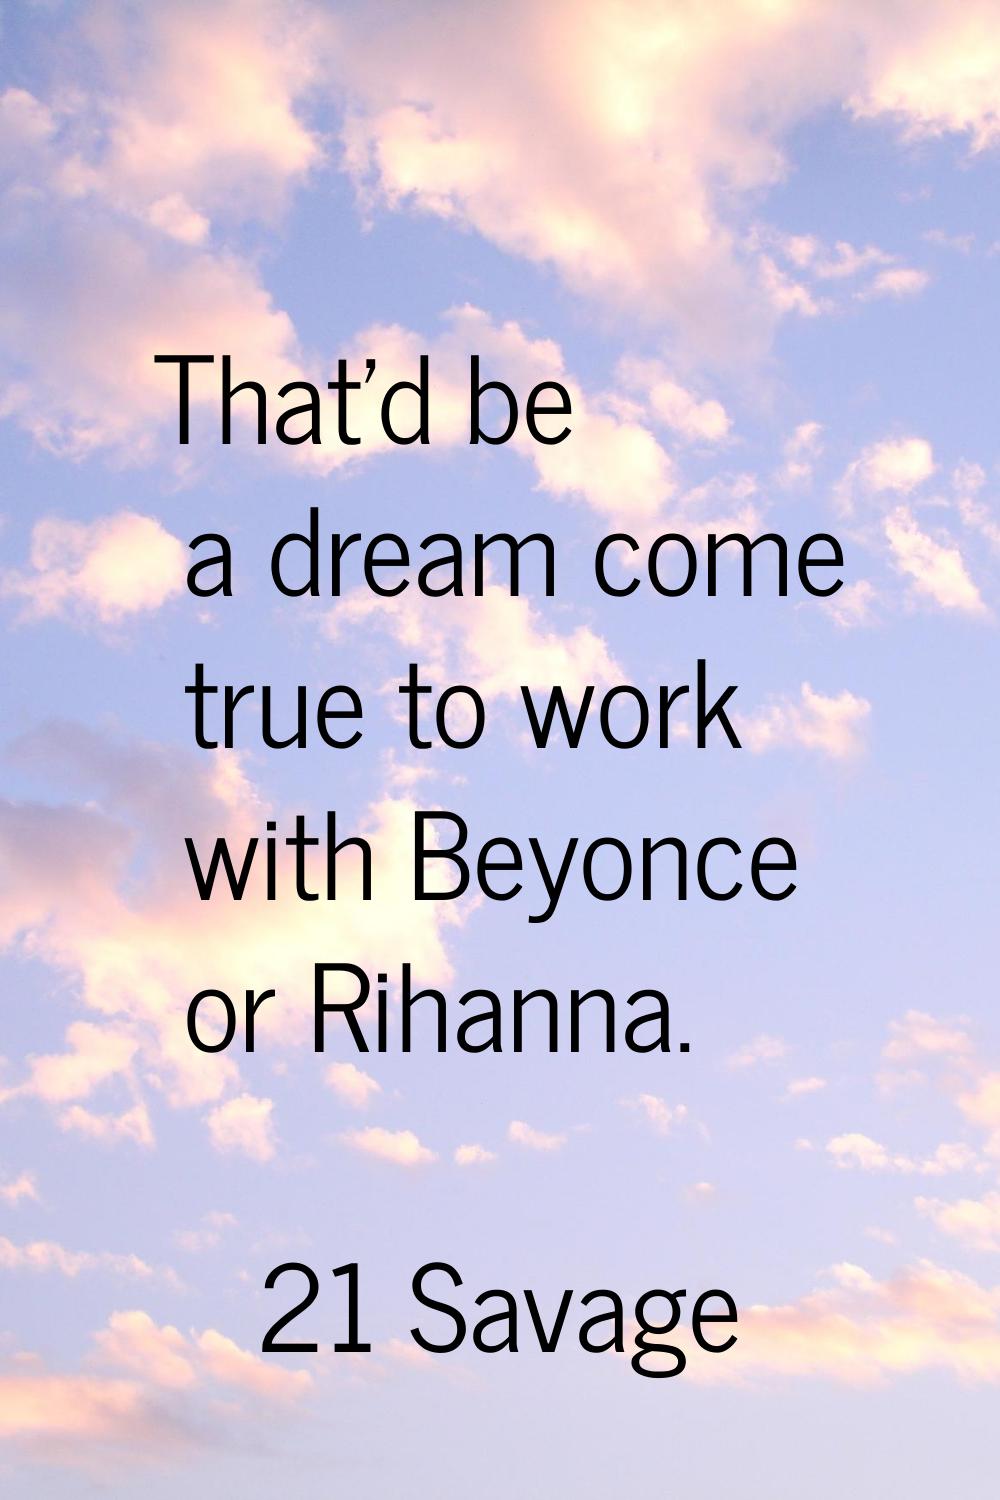 That'd be a dream come true to work with Beyonce or Rihanna.